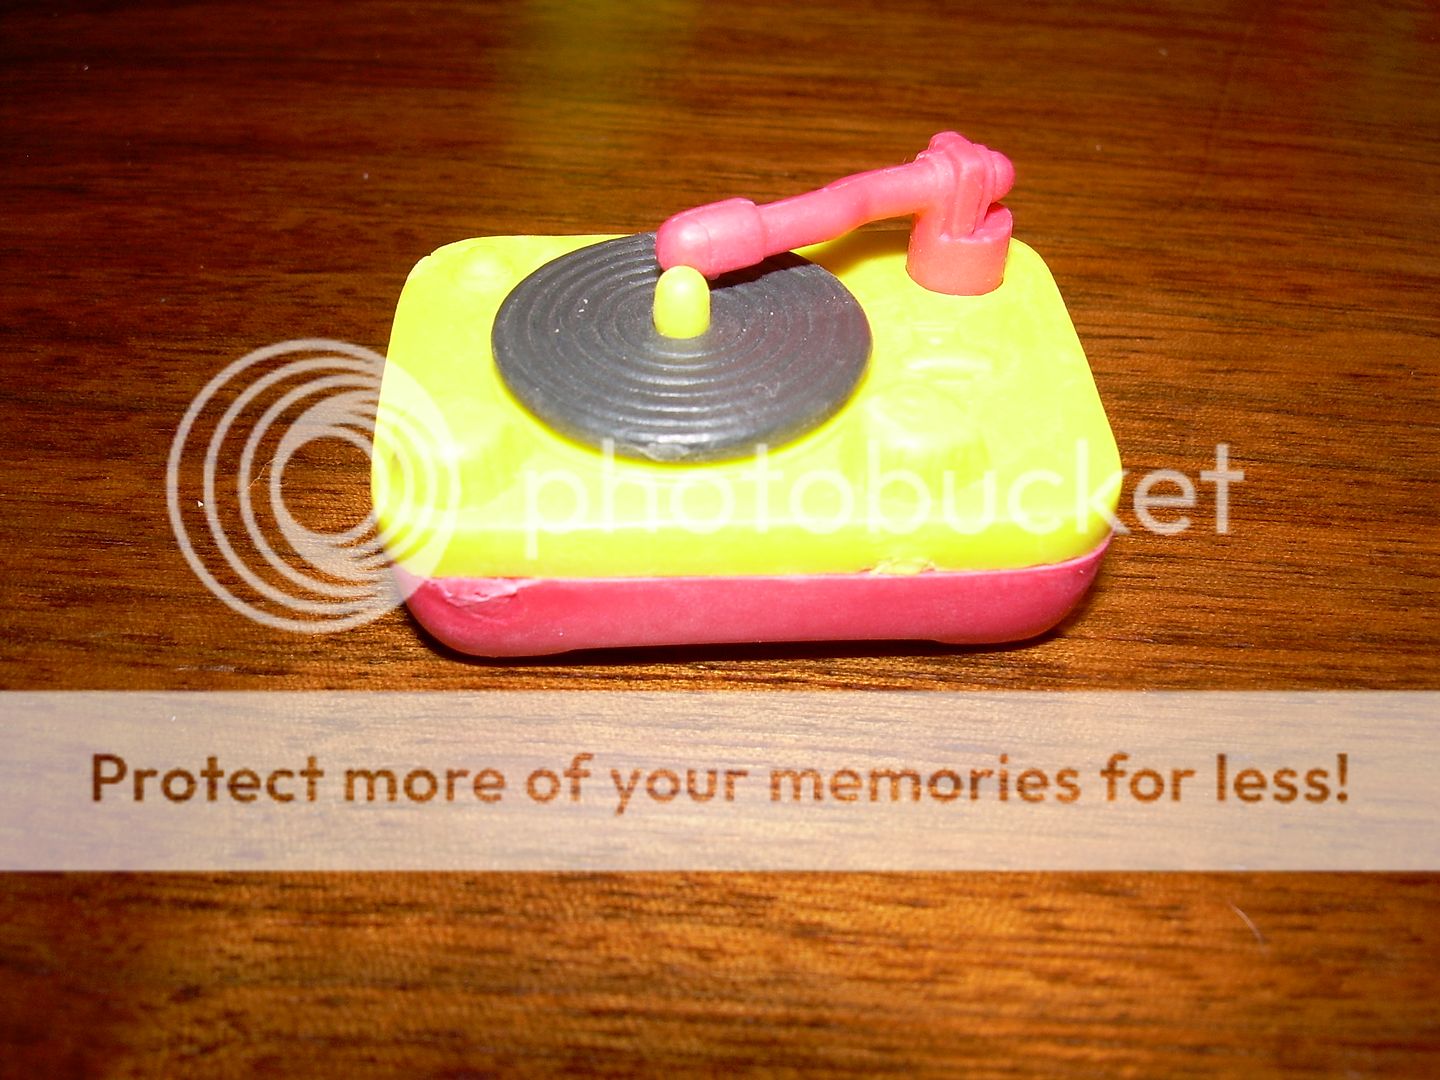 GOMU Series 1 Pink & Yellow RECORD PLAYER Turn Table g70 Gadgets 